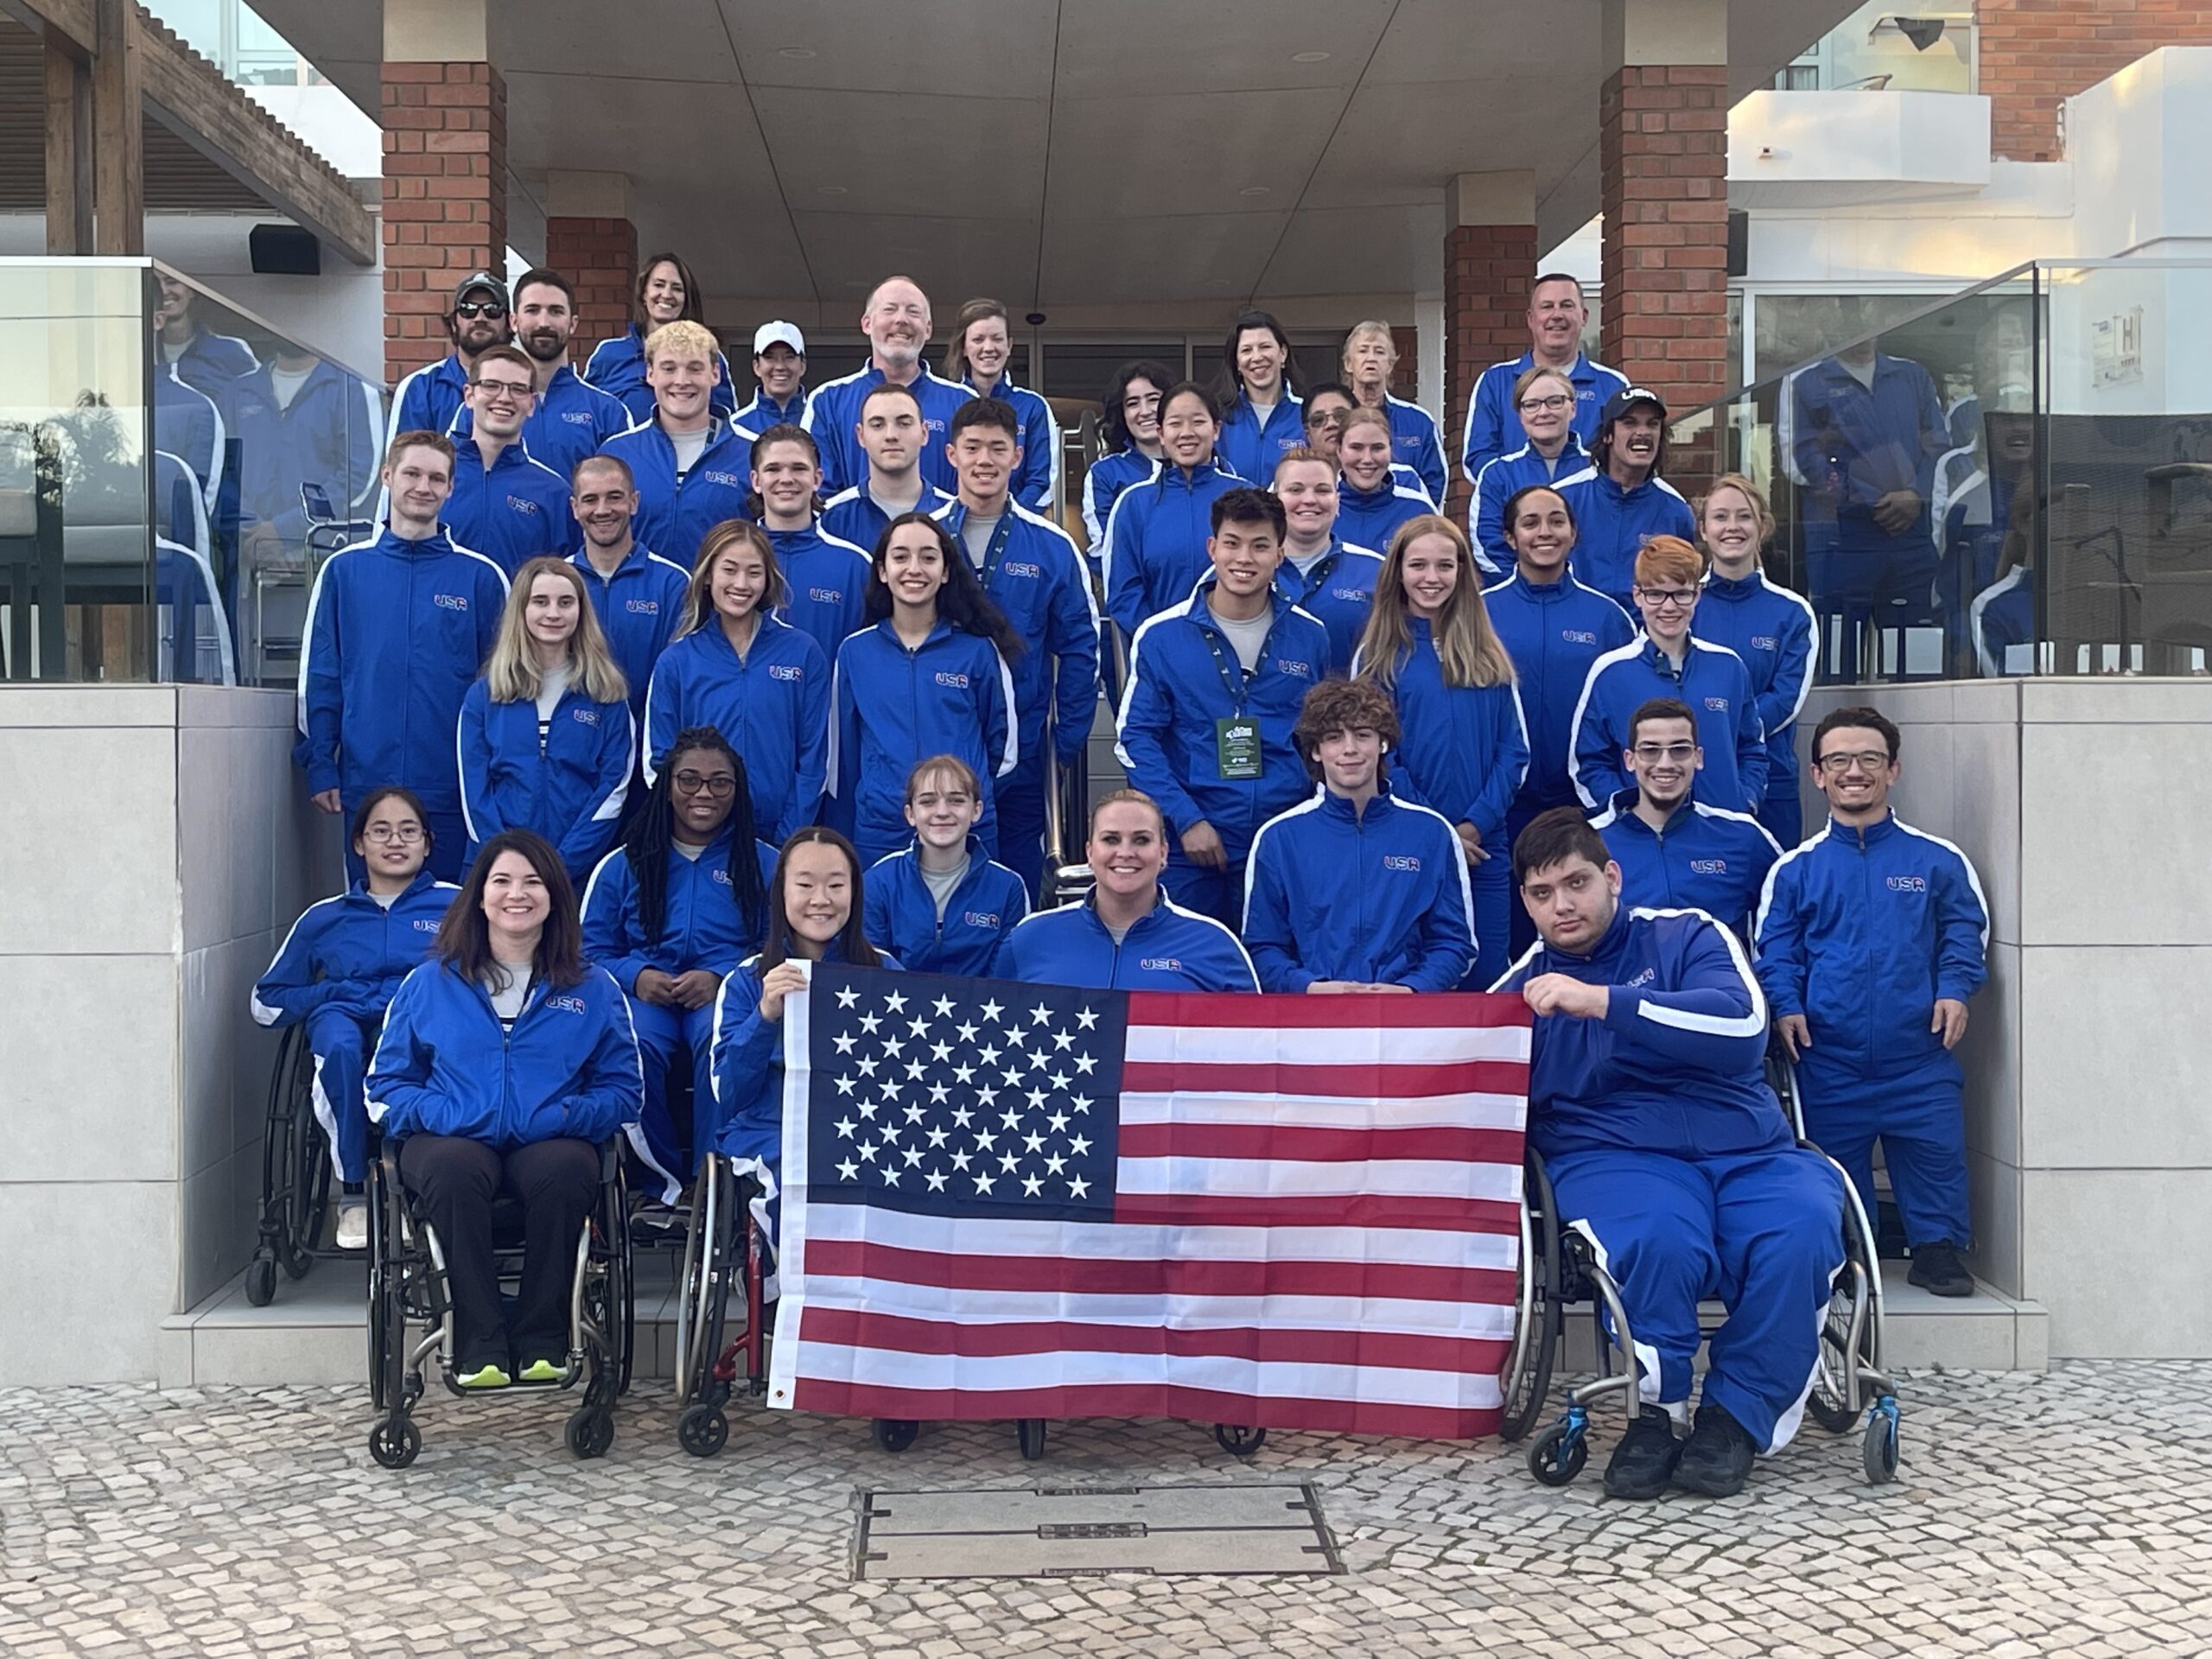 Group of athletes and staff wearing USA uniform posed on stairs with USA flag